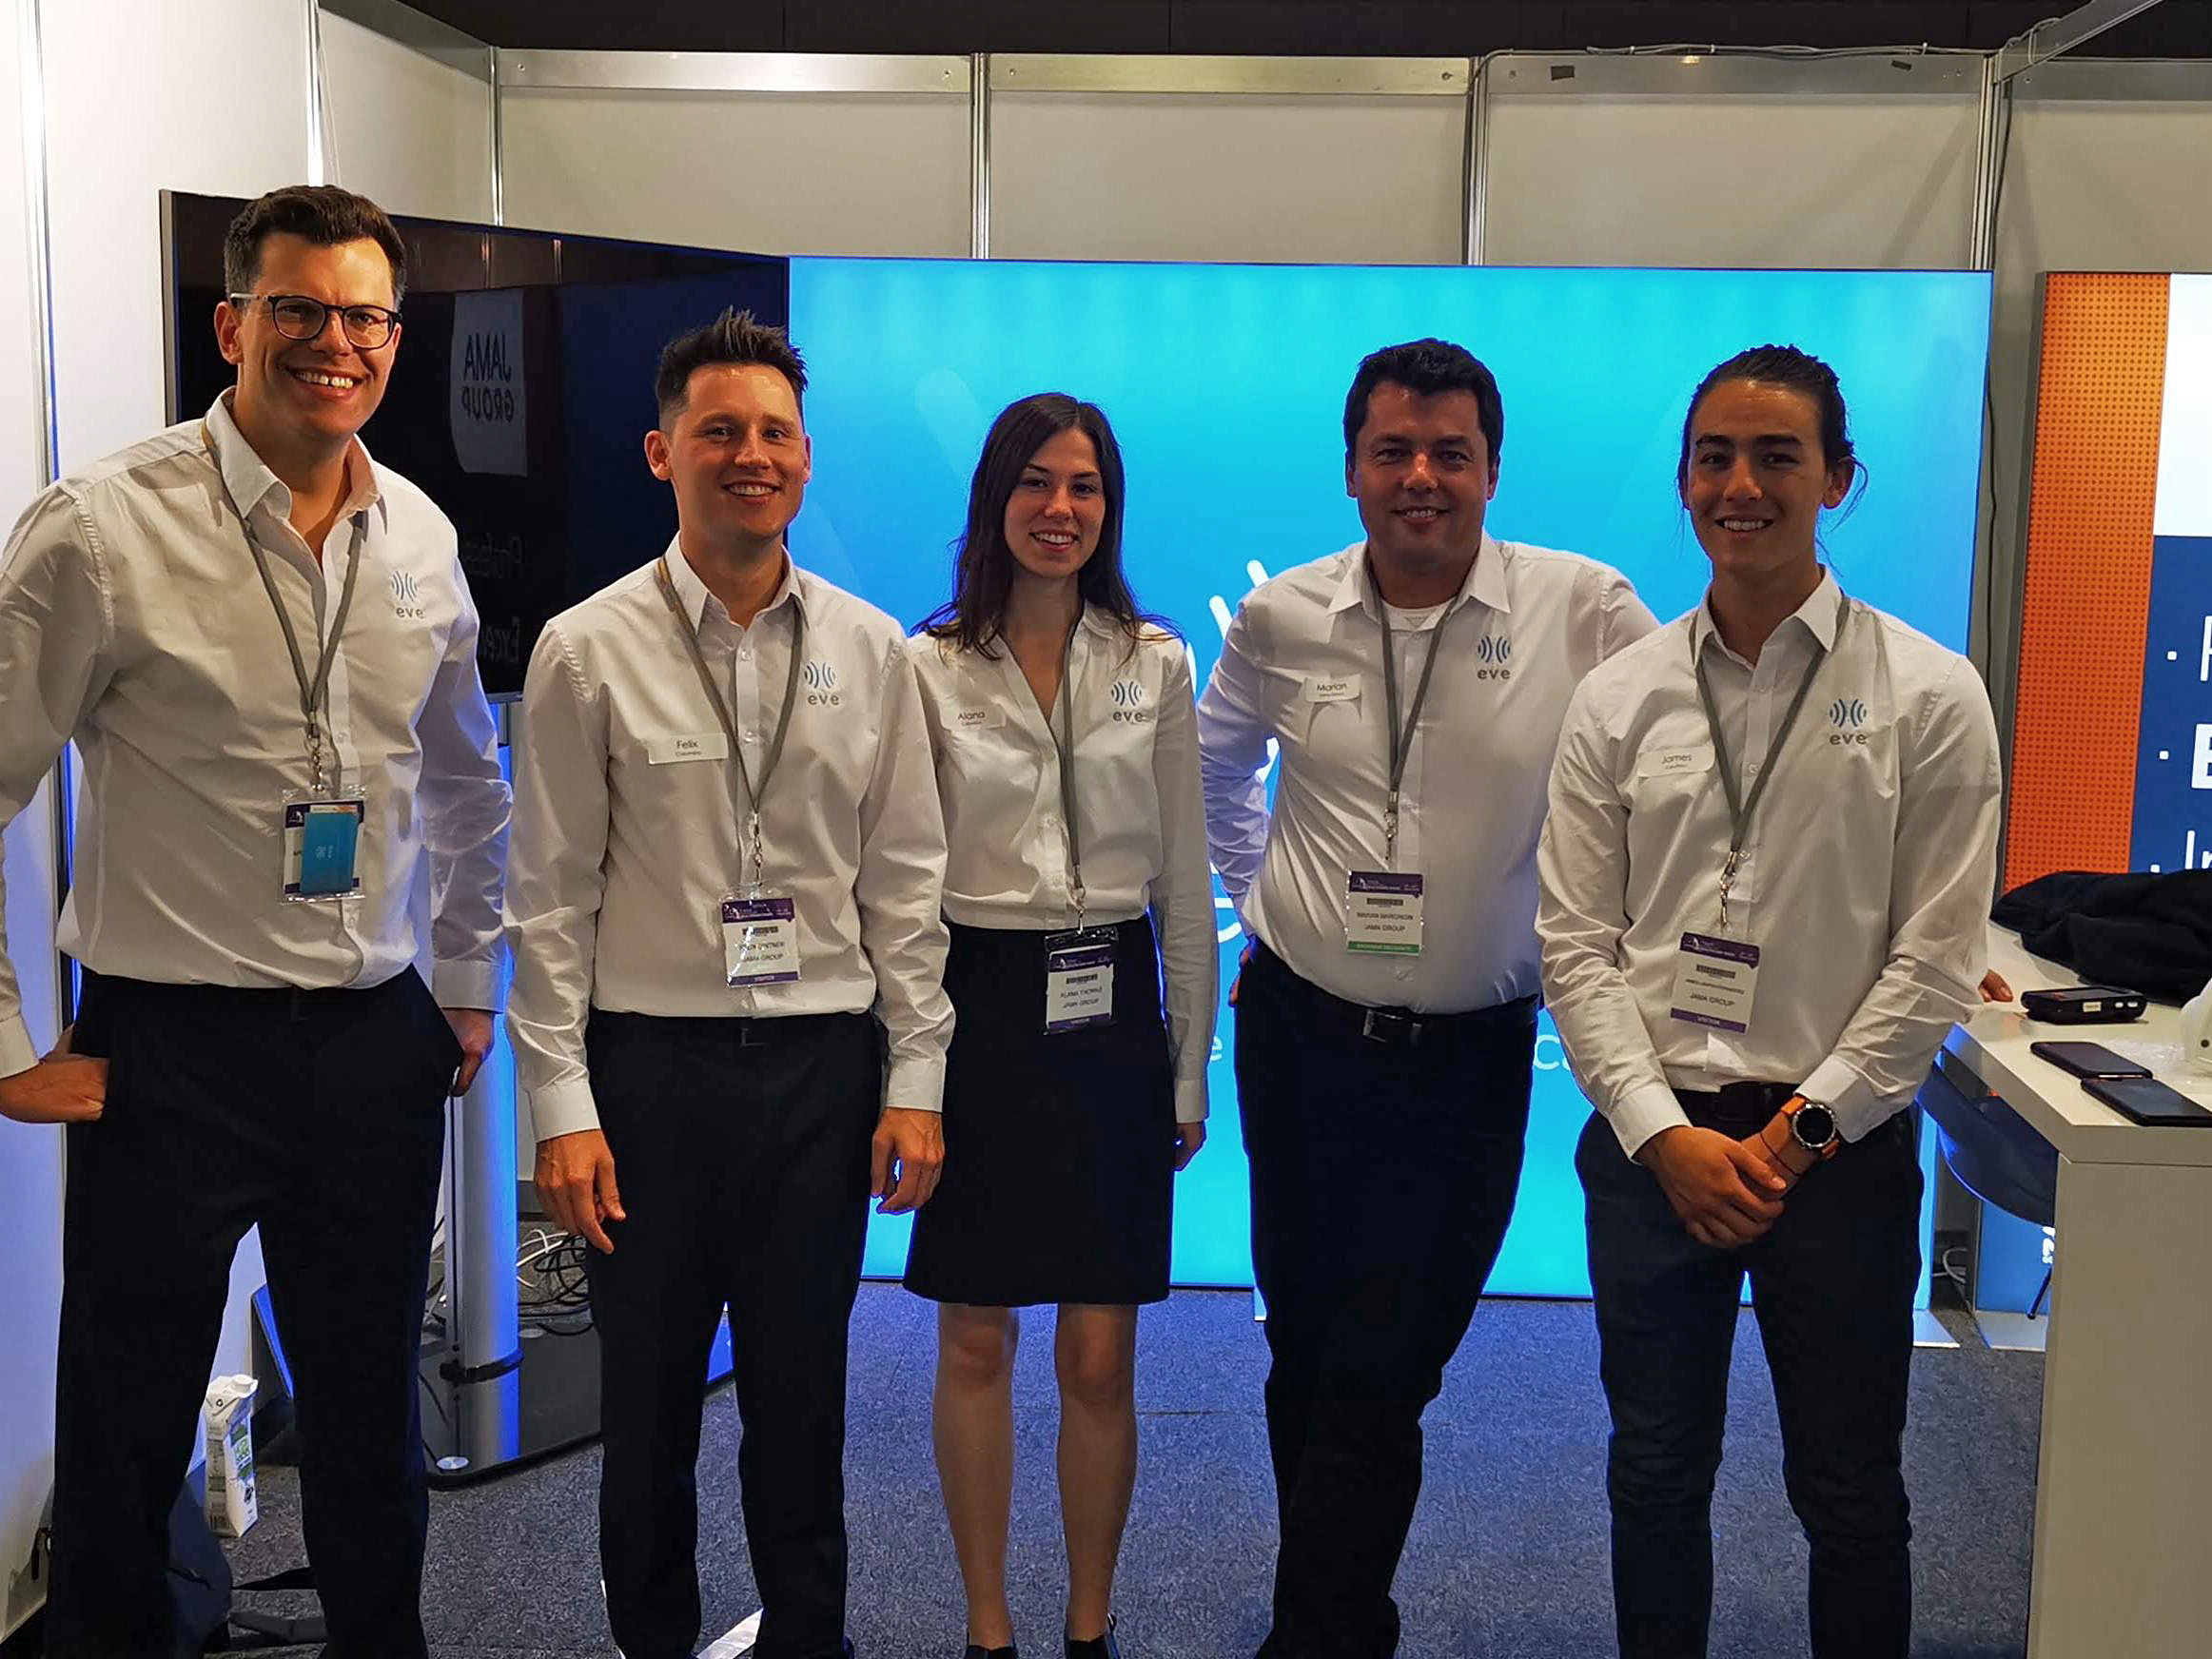 Calumino and Jama Group celebrated the soft launch of Eve Care at the 9th Australian Healthcare Week in March 2019